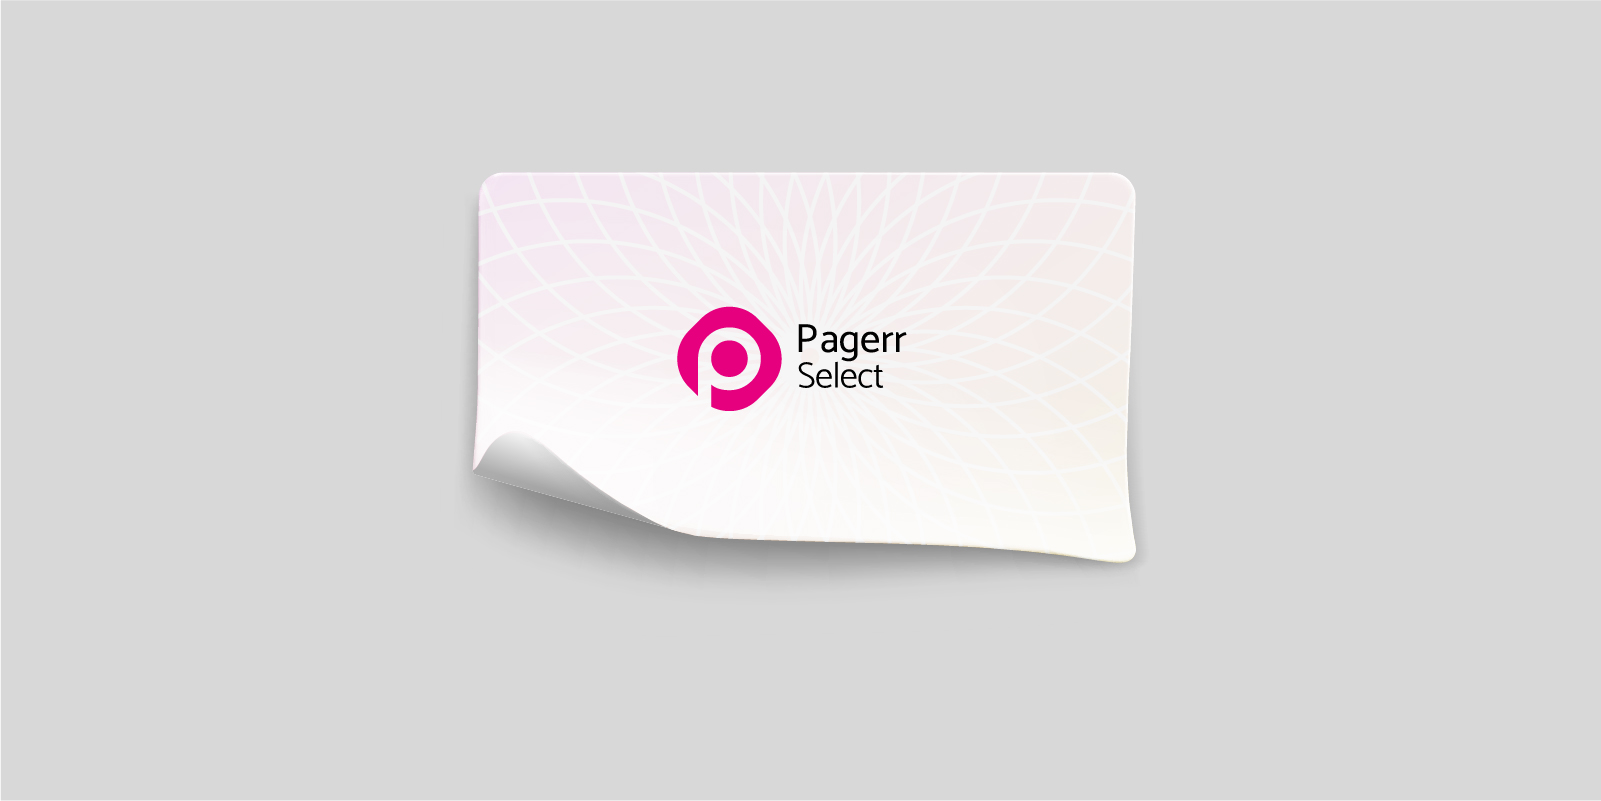 Sheet stickers in Paris - Print with Pagerr